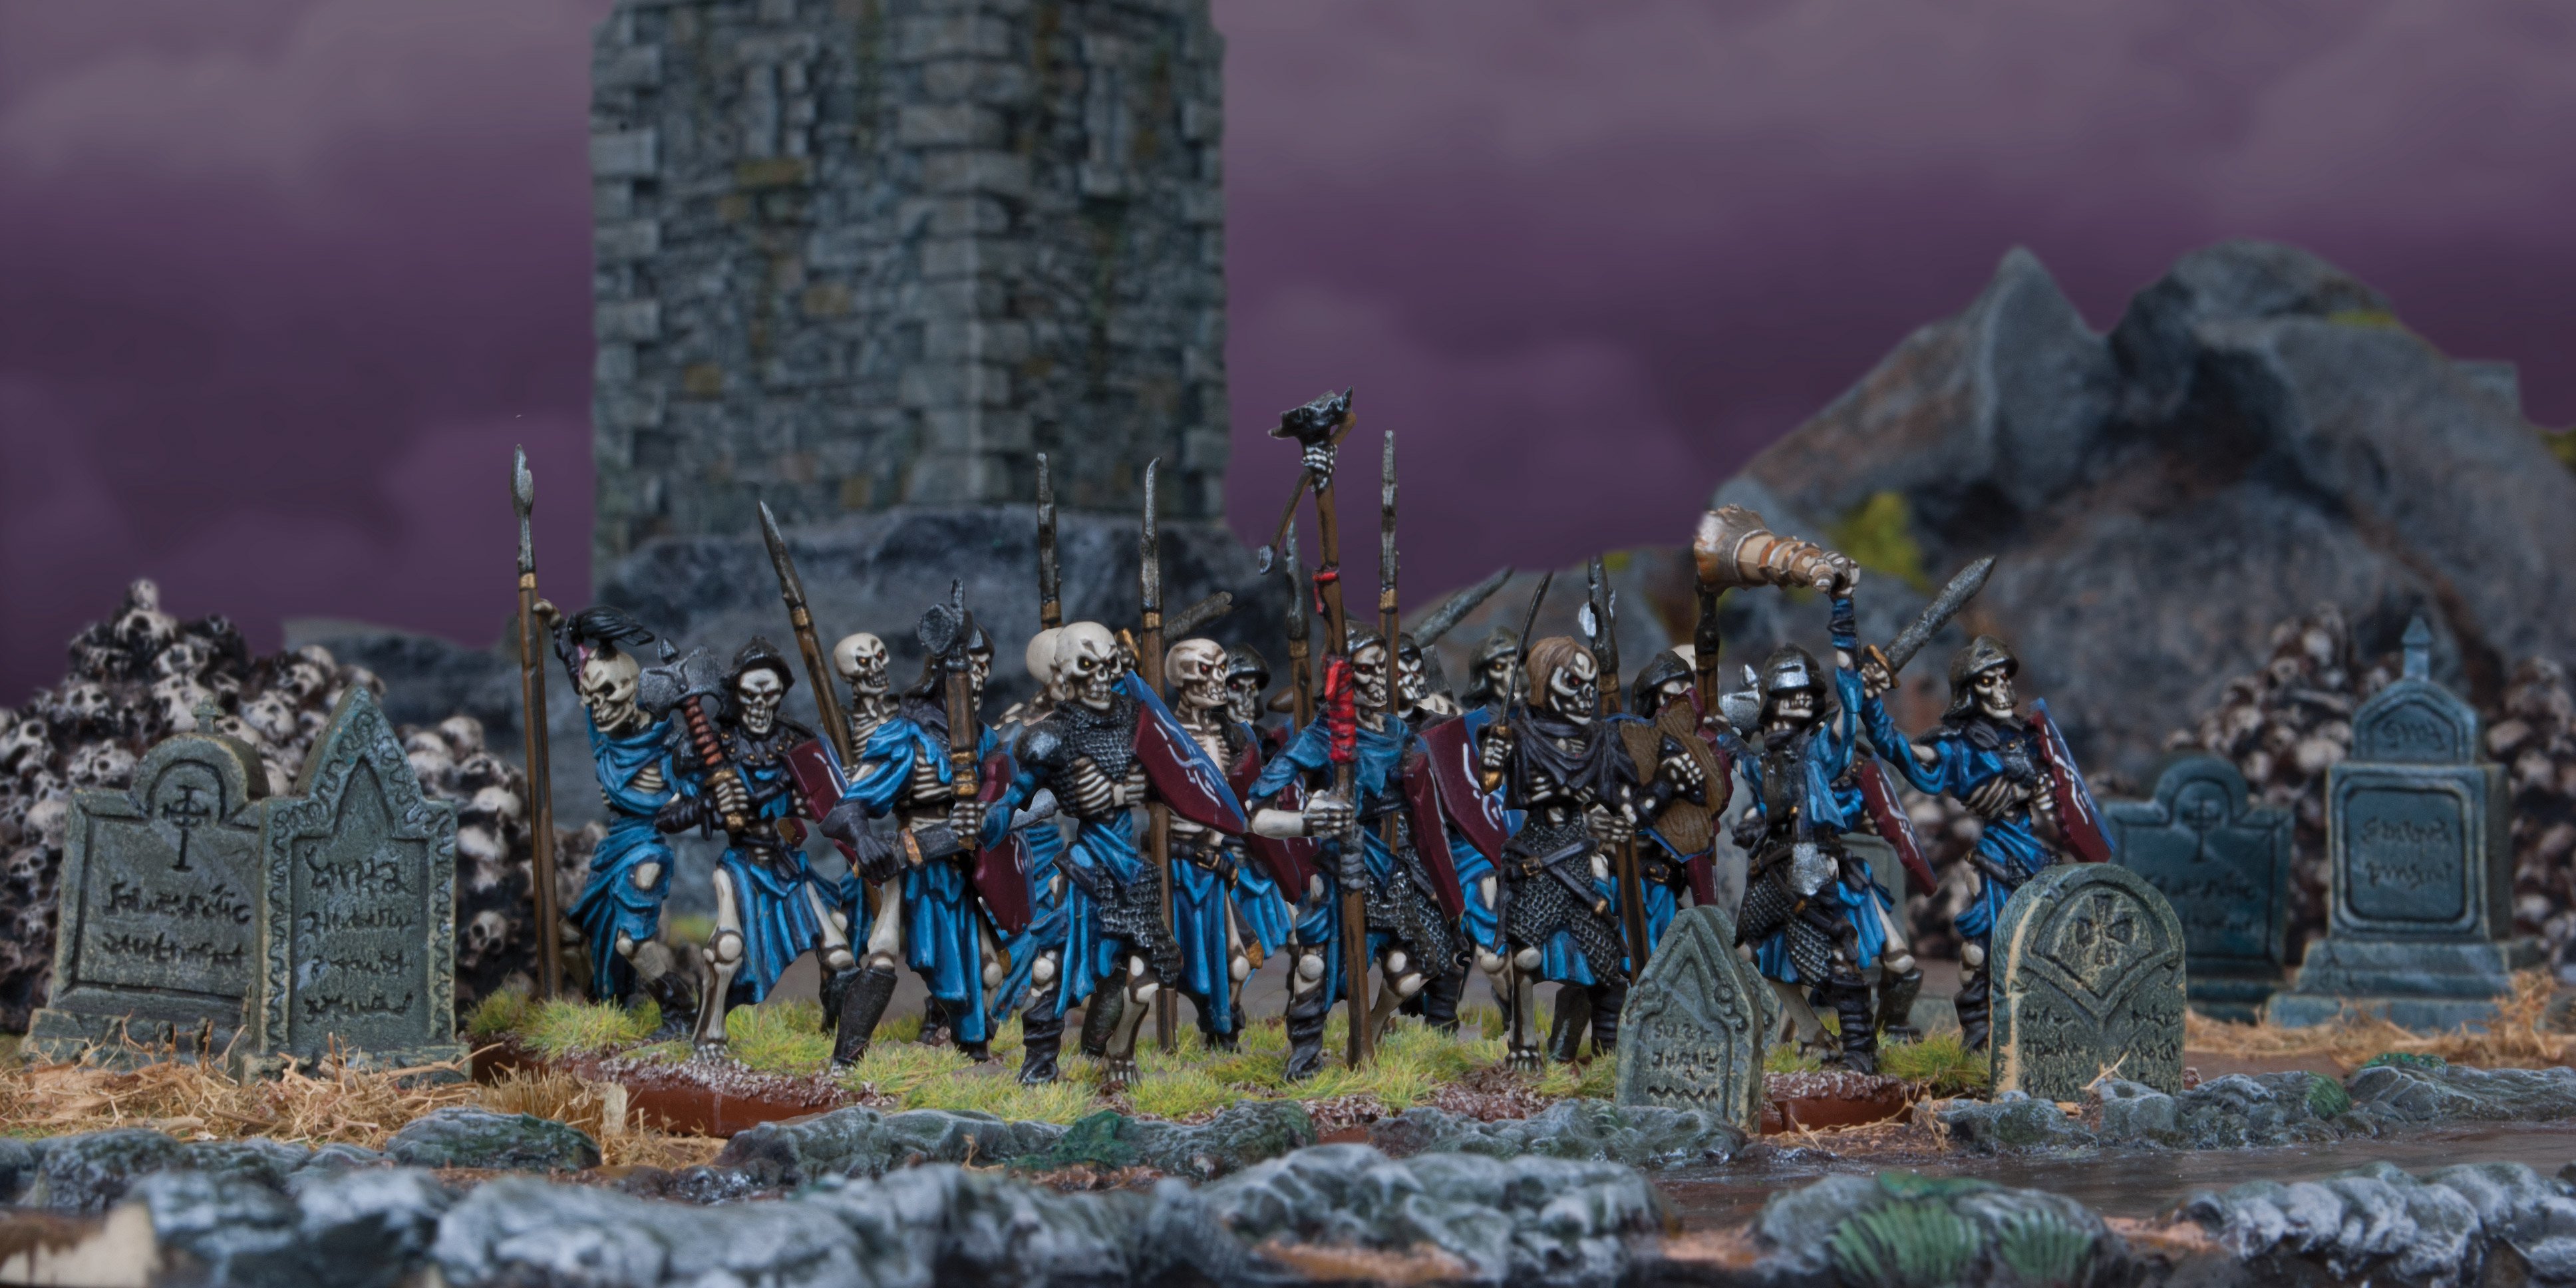 Undead Mega Army Gallery Image 5